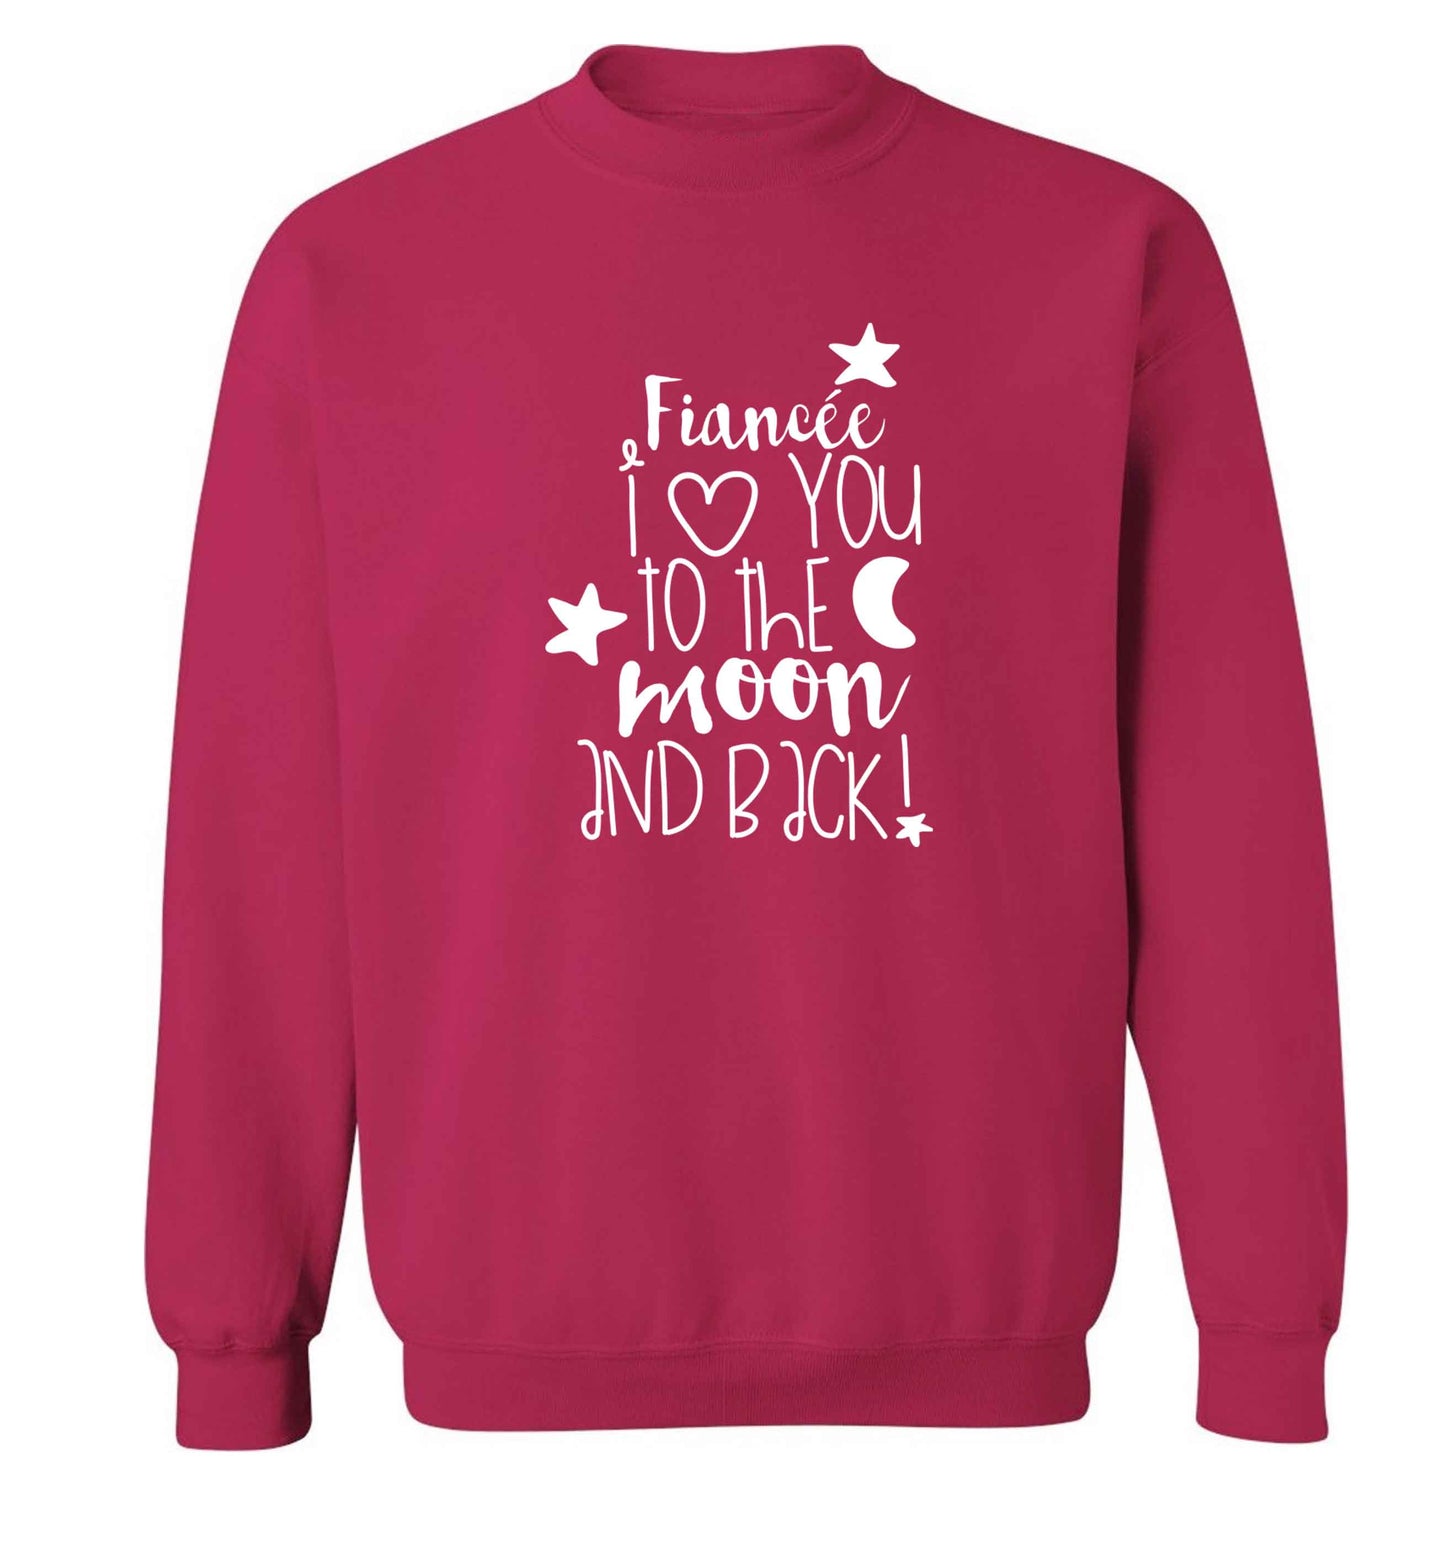 Fiancée I love you to the moon and back adult's unisex pink sweater 2XL